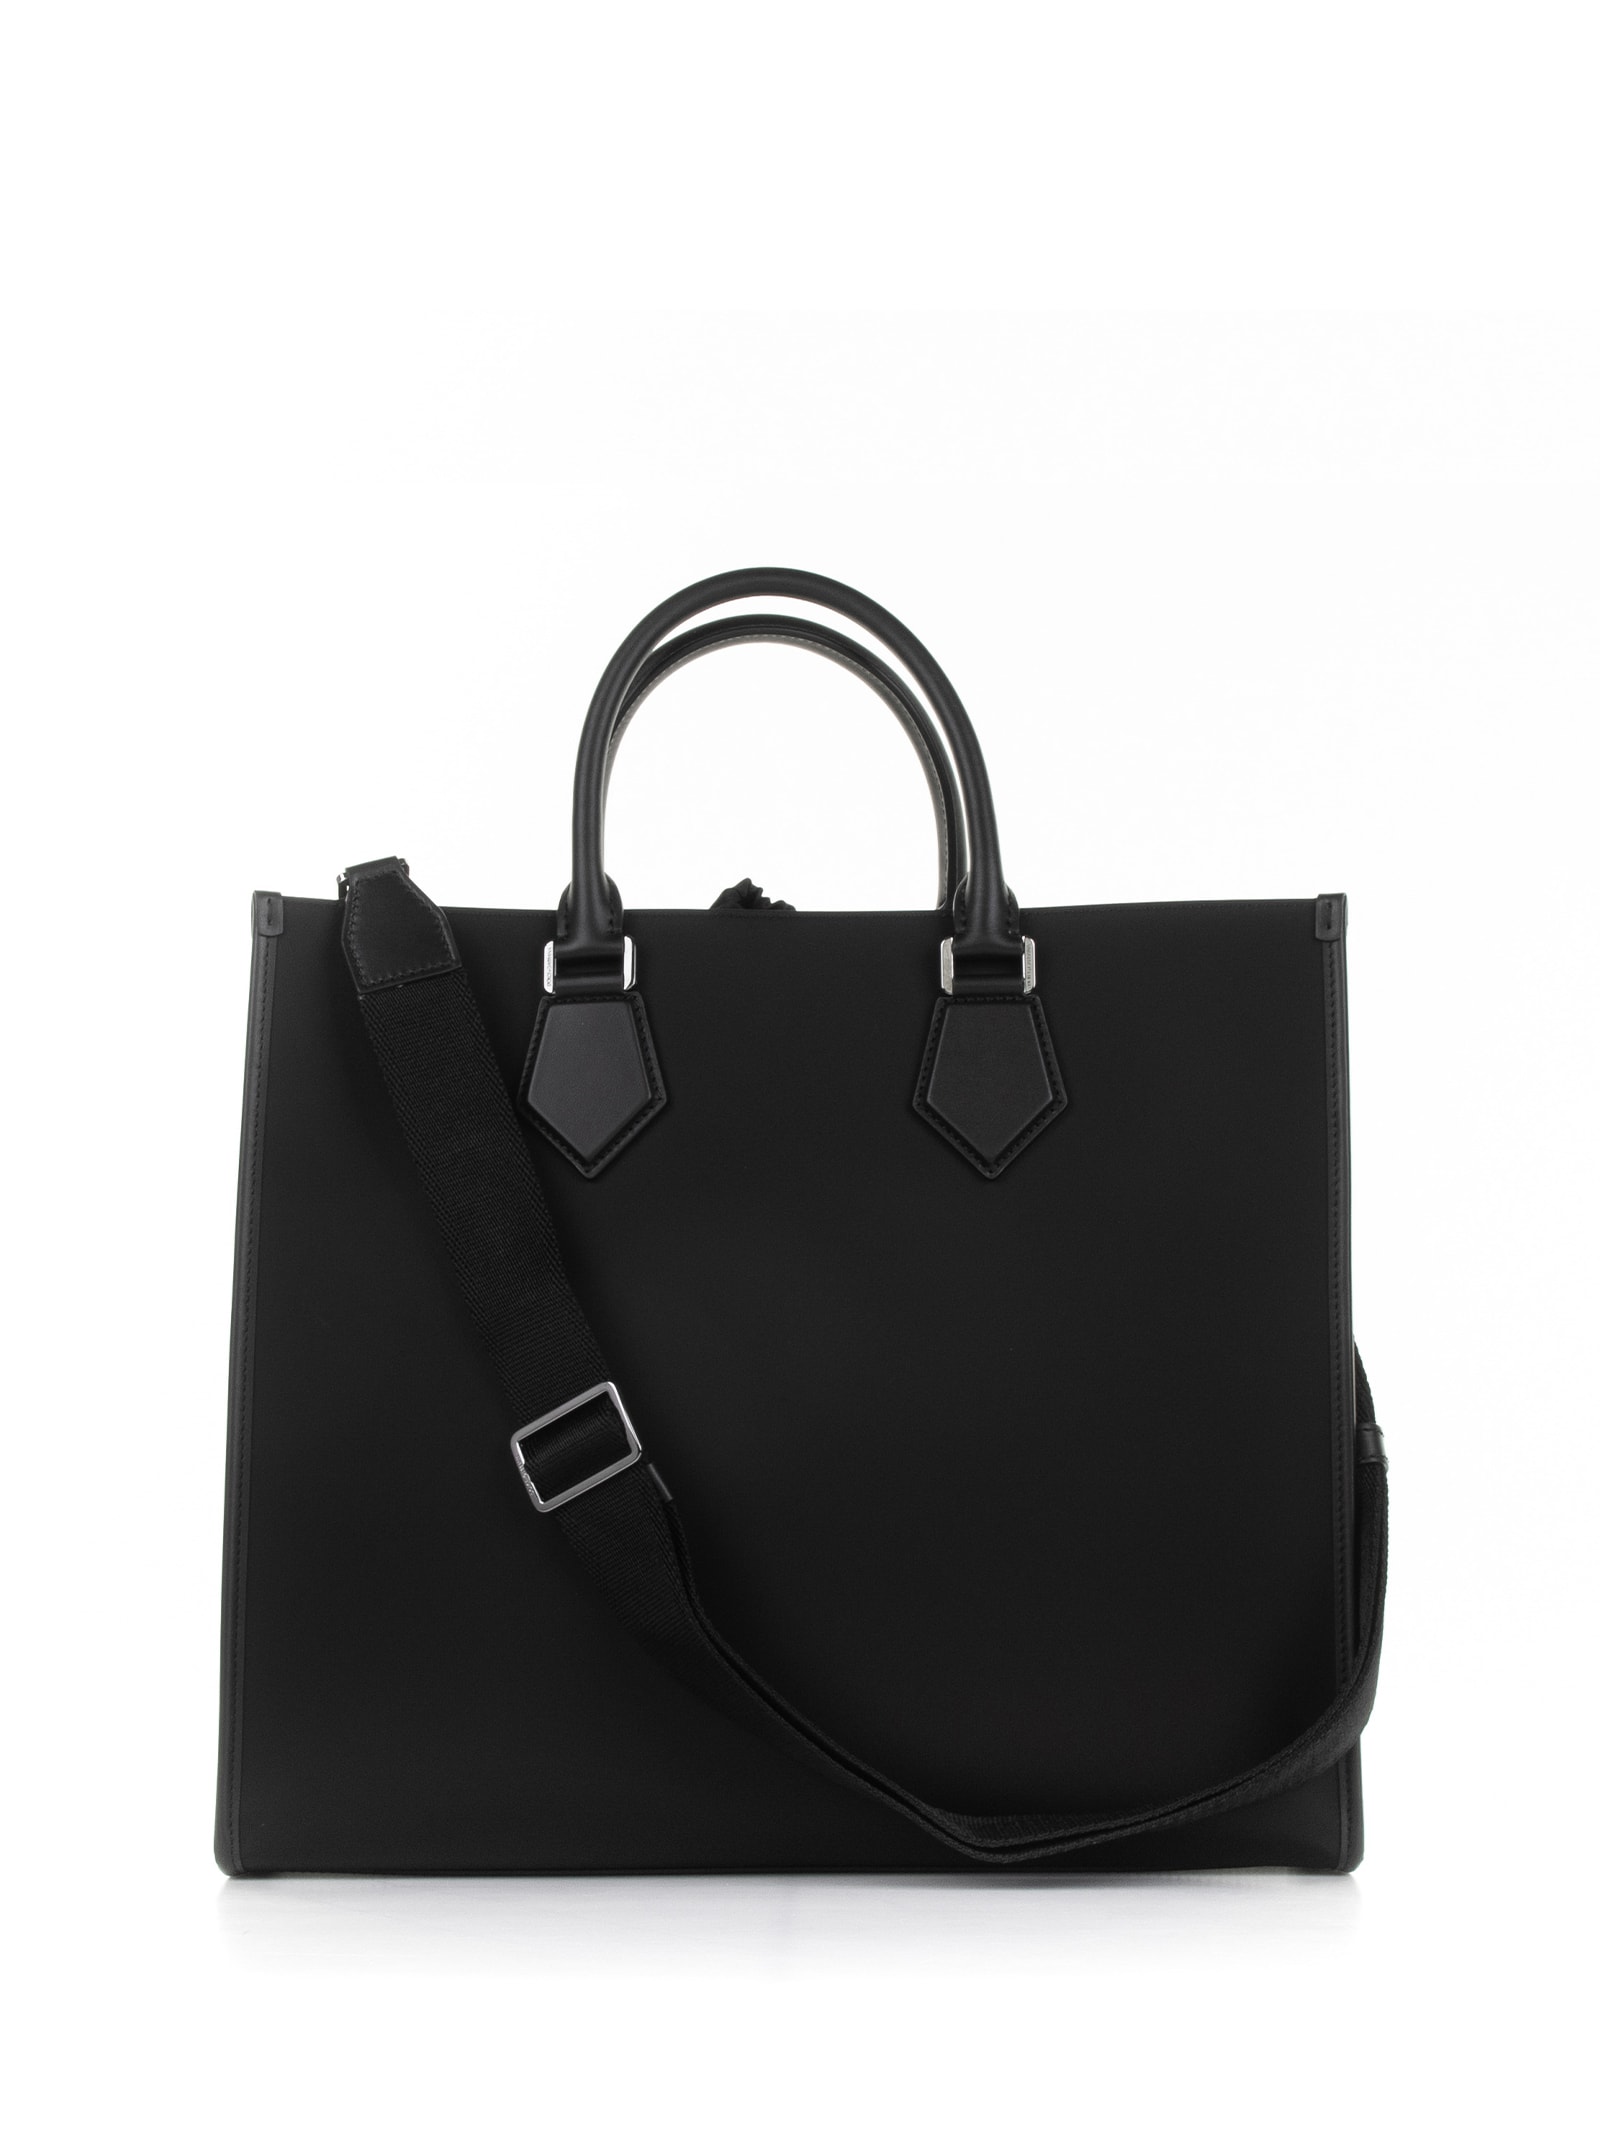 Shop Dolce & Gabbana Large Shopping Bag In Nylon And Leather With Rubberized Logo In Nero Nero